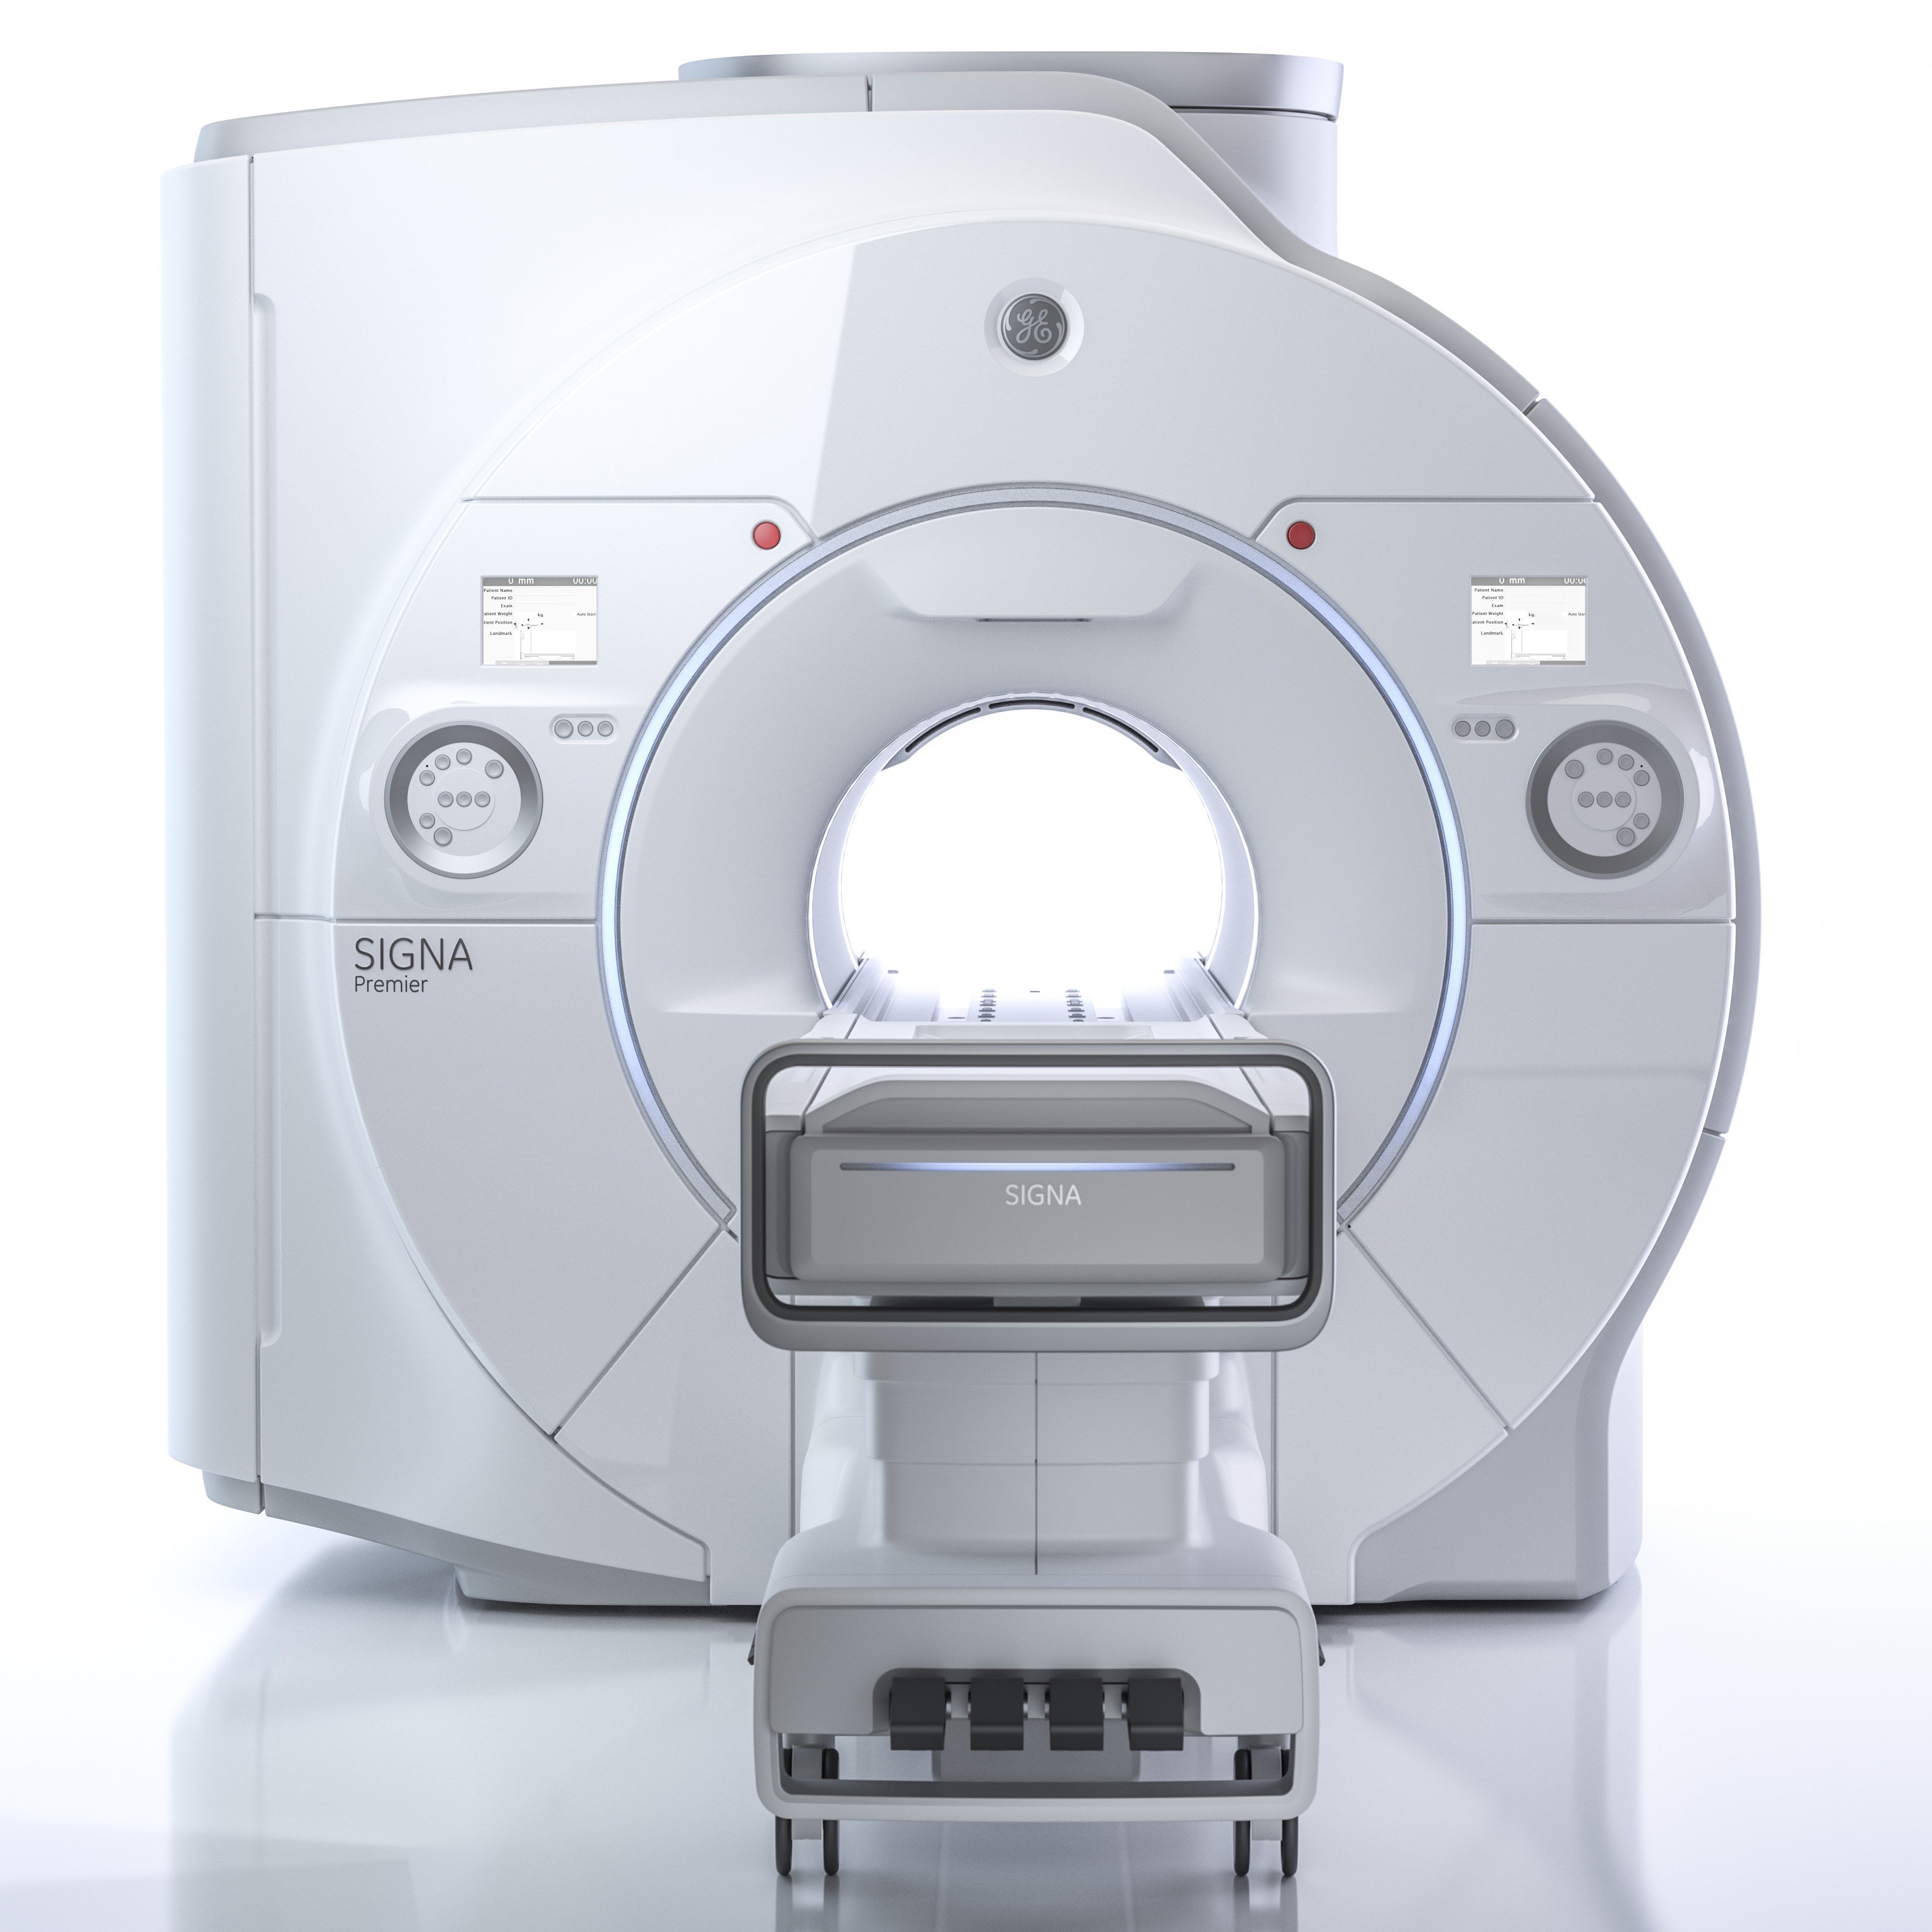 The GE Healthcare Signa Premier MRI was among the top radiology stories from August 2017